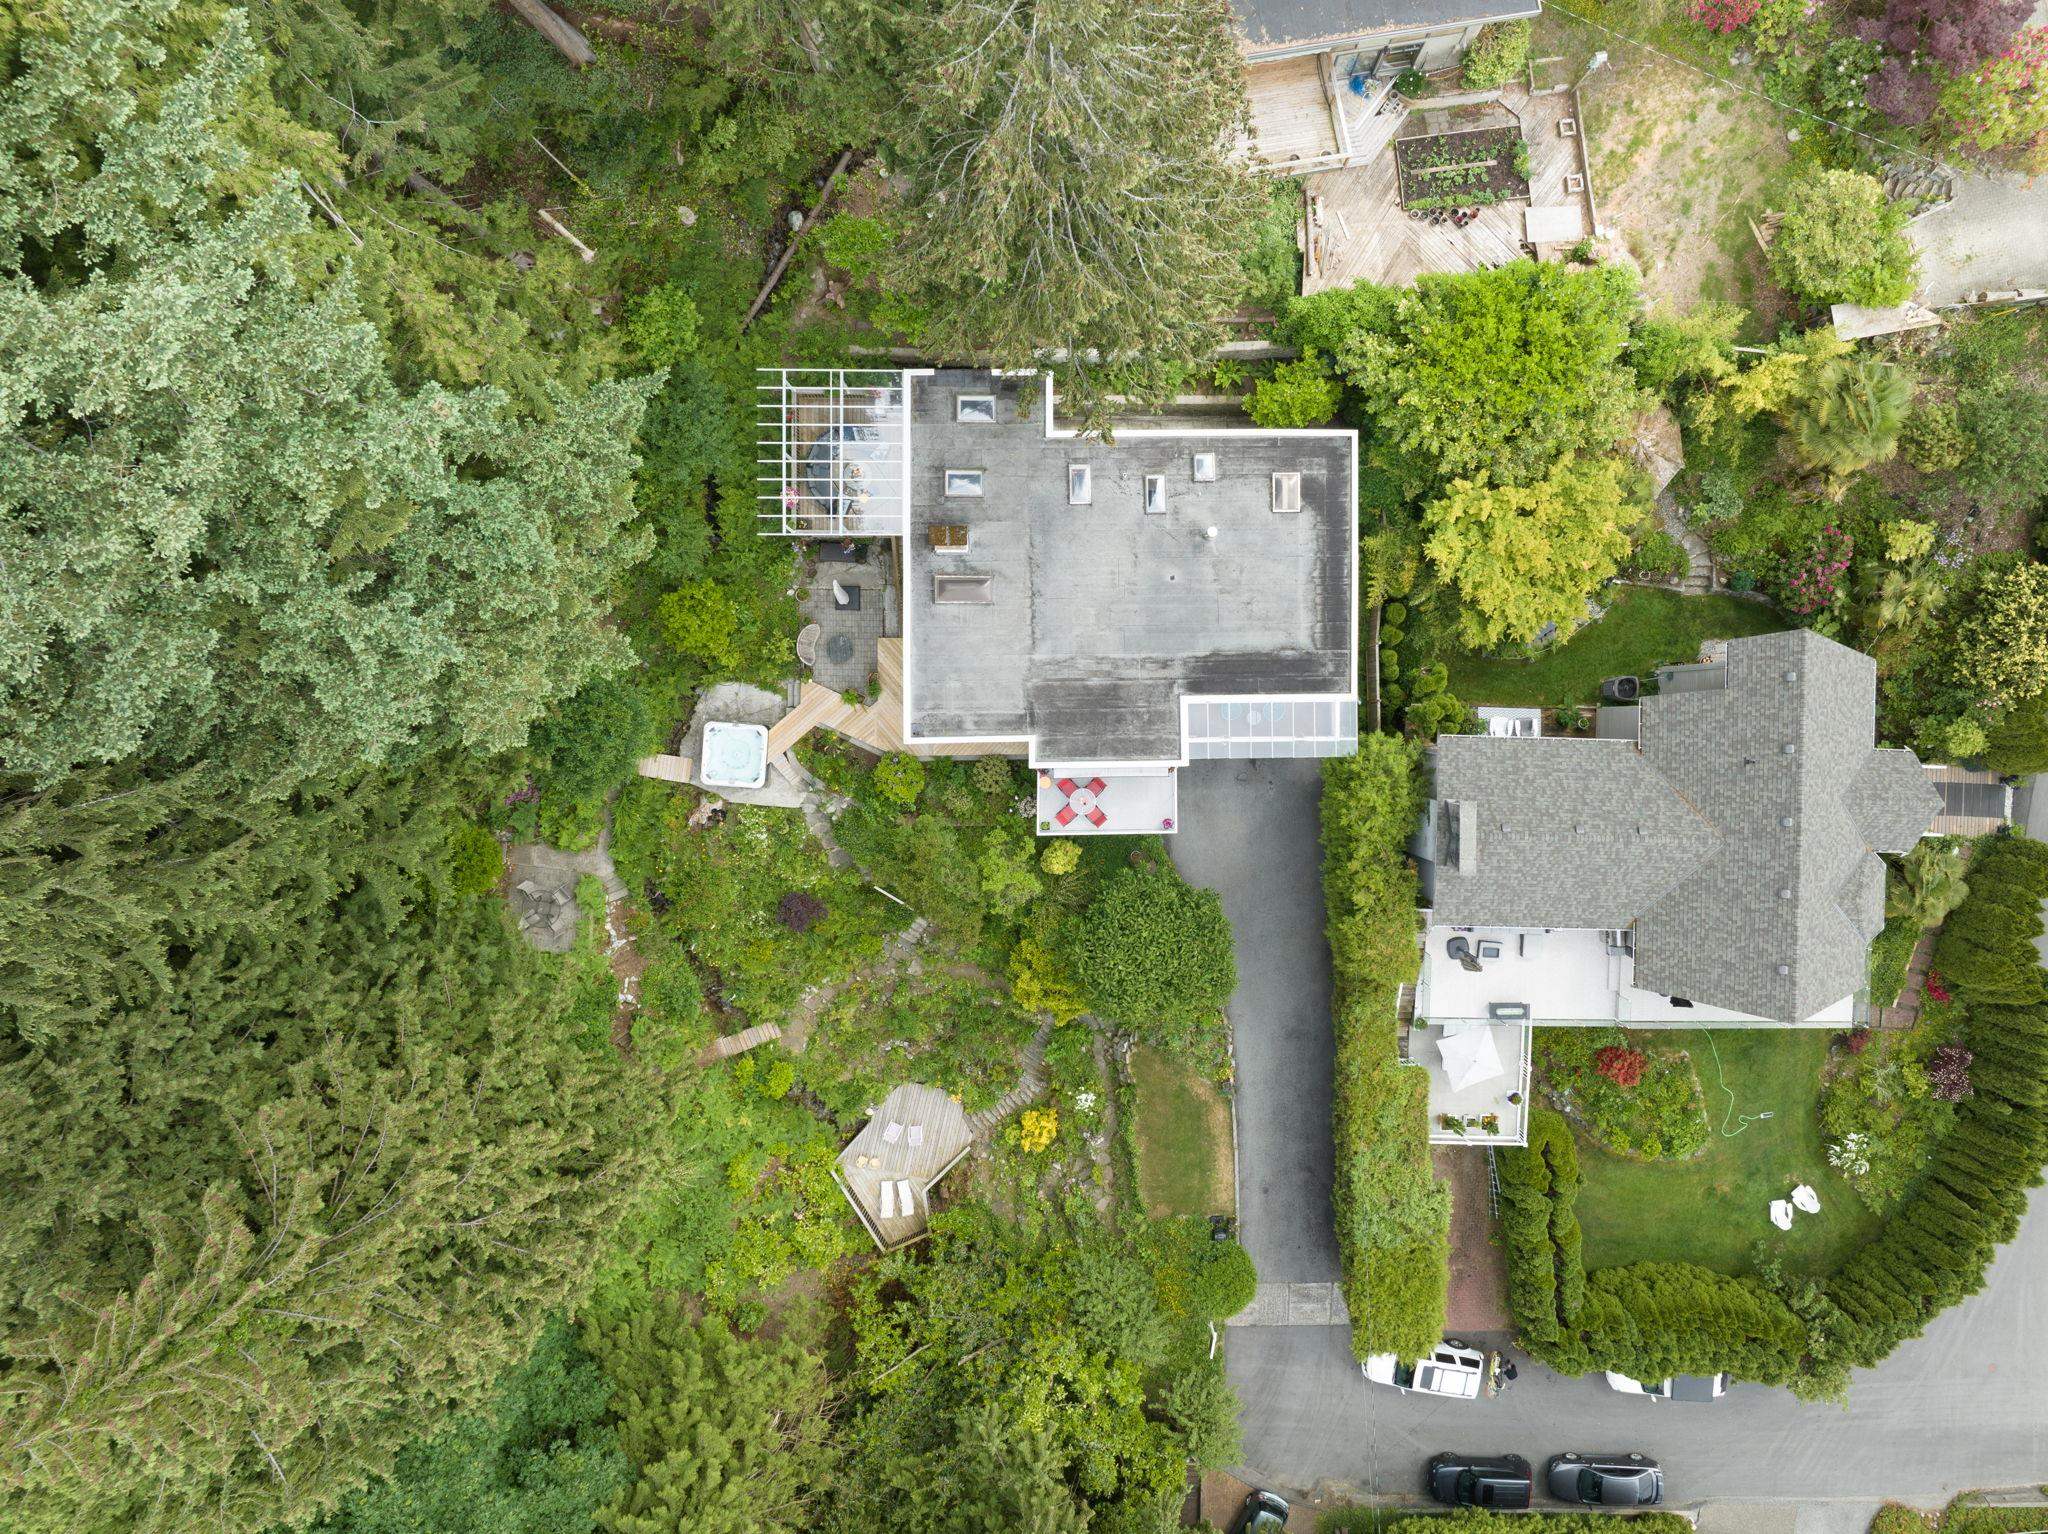 Listing image of 195 ISLEVIEW PLACE